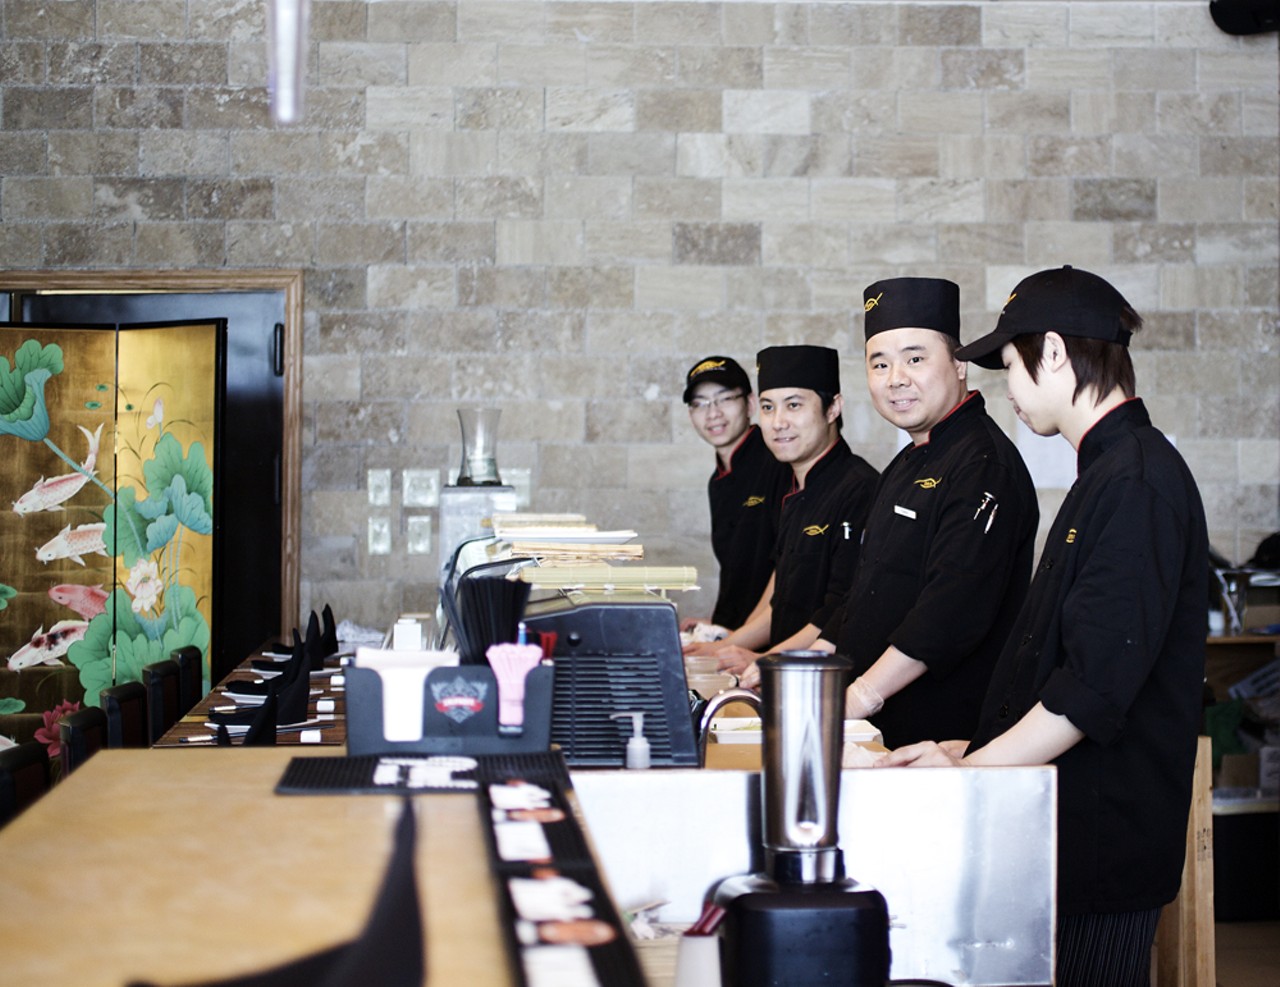 From left to right, sushi chefs, Dennis He, Tony Chen, Tim Jiang, Jackie Lee.